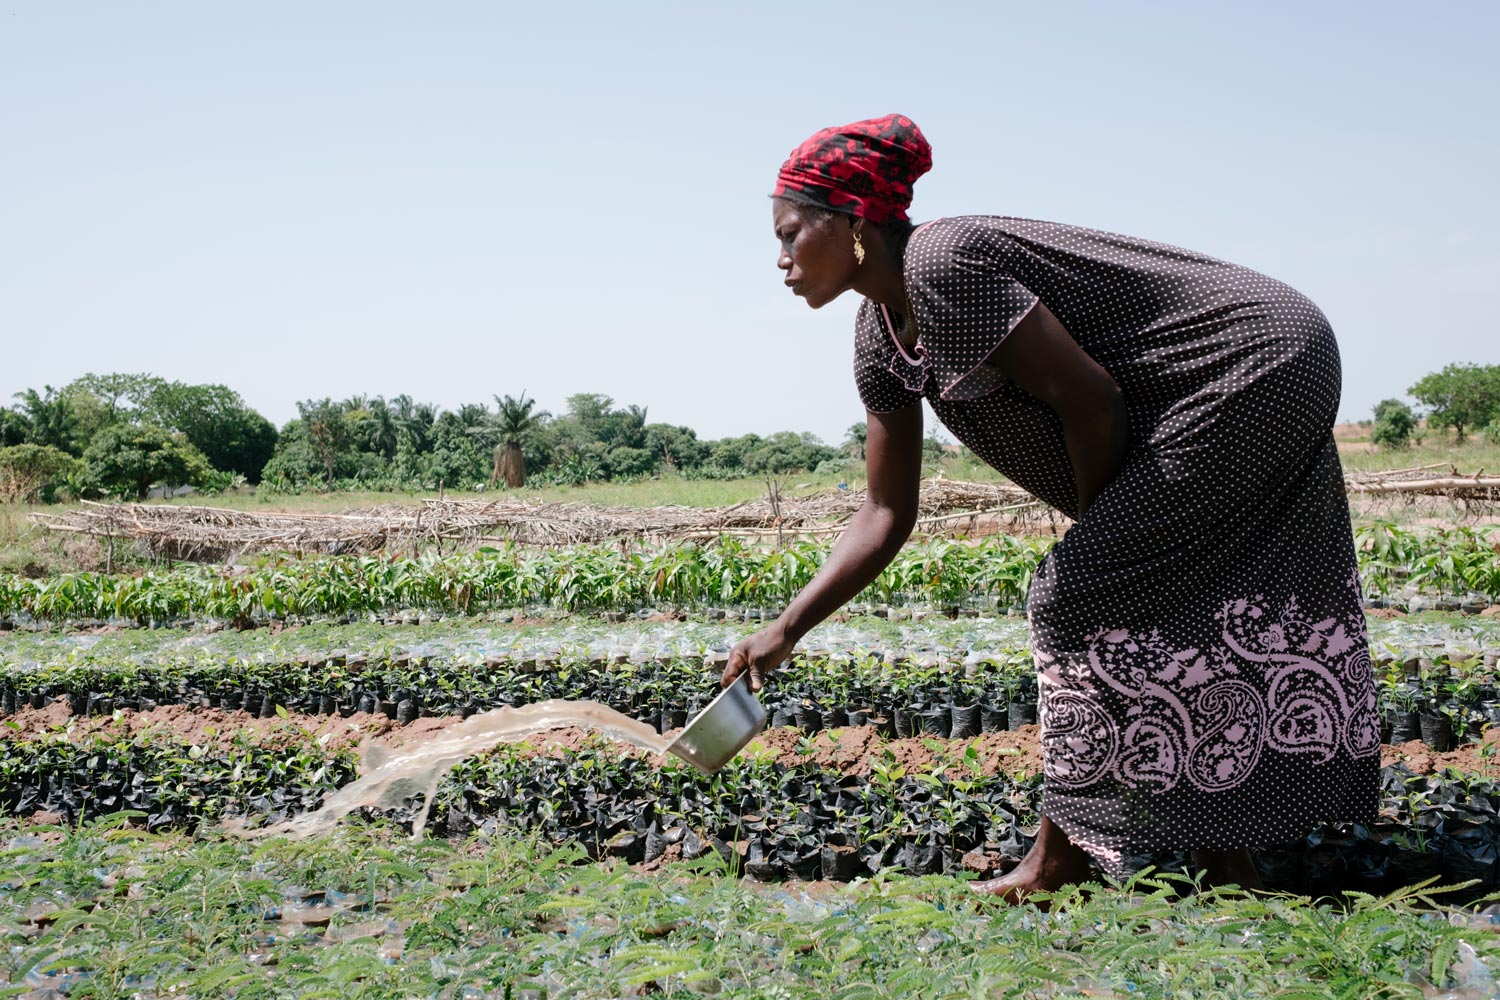 A woman watering seedlings in a field, with a bowl of water